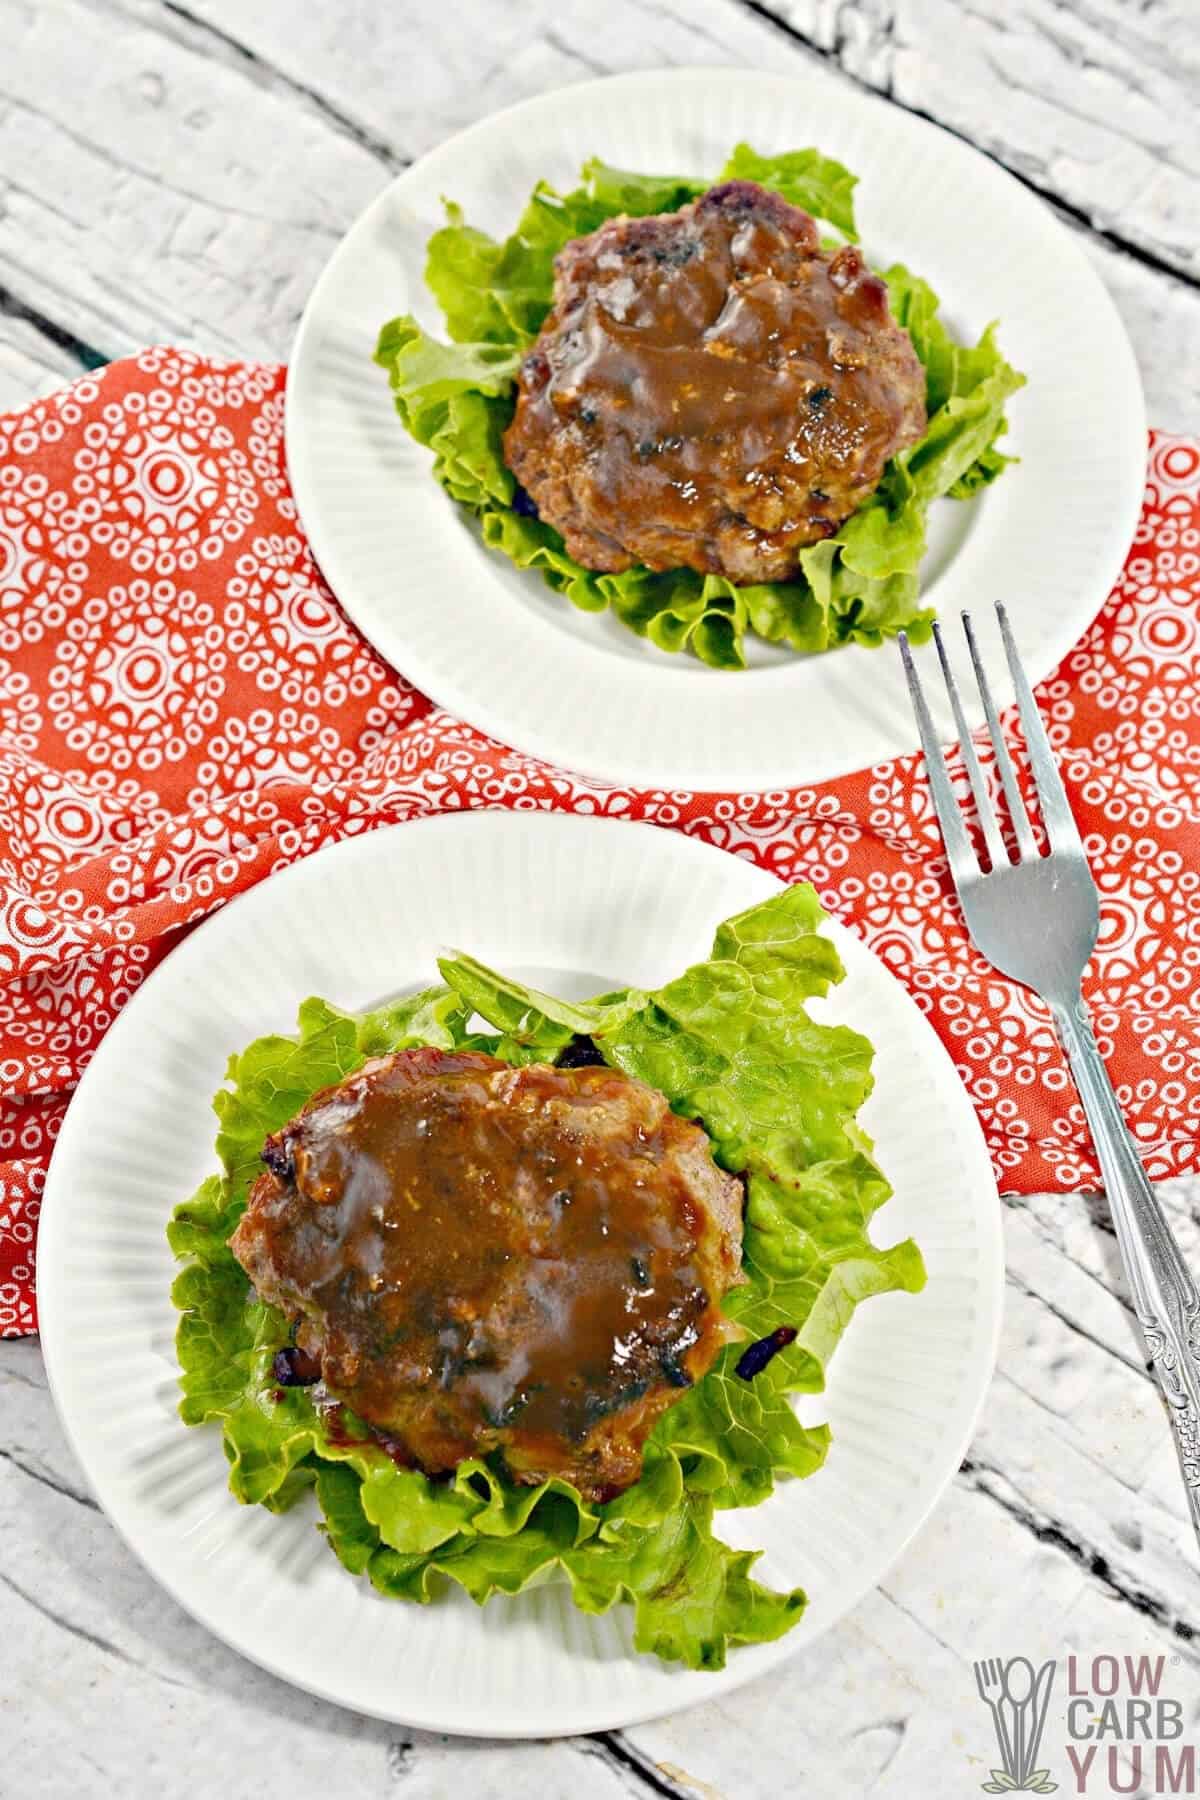 two hamburger steaks on lettuce served on a white plate